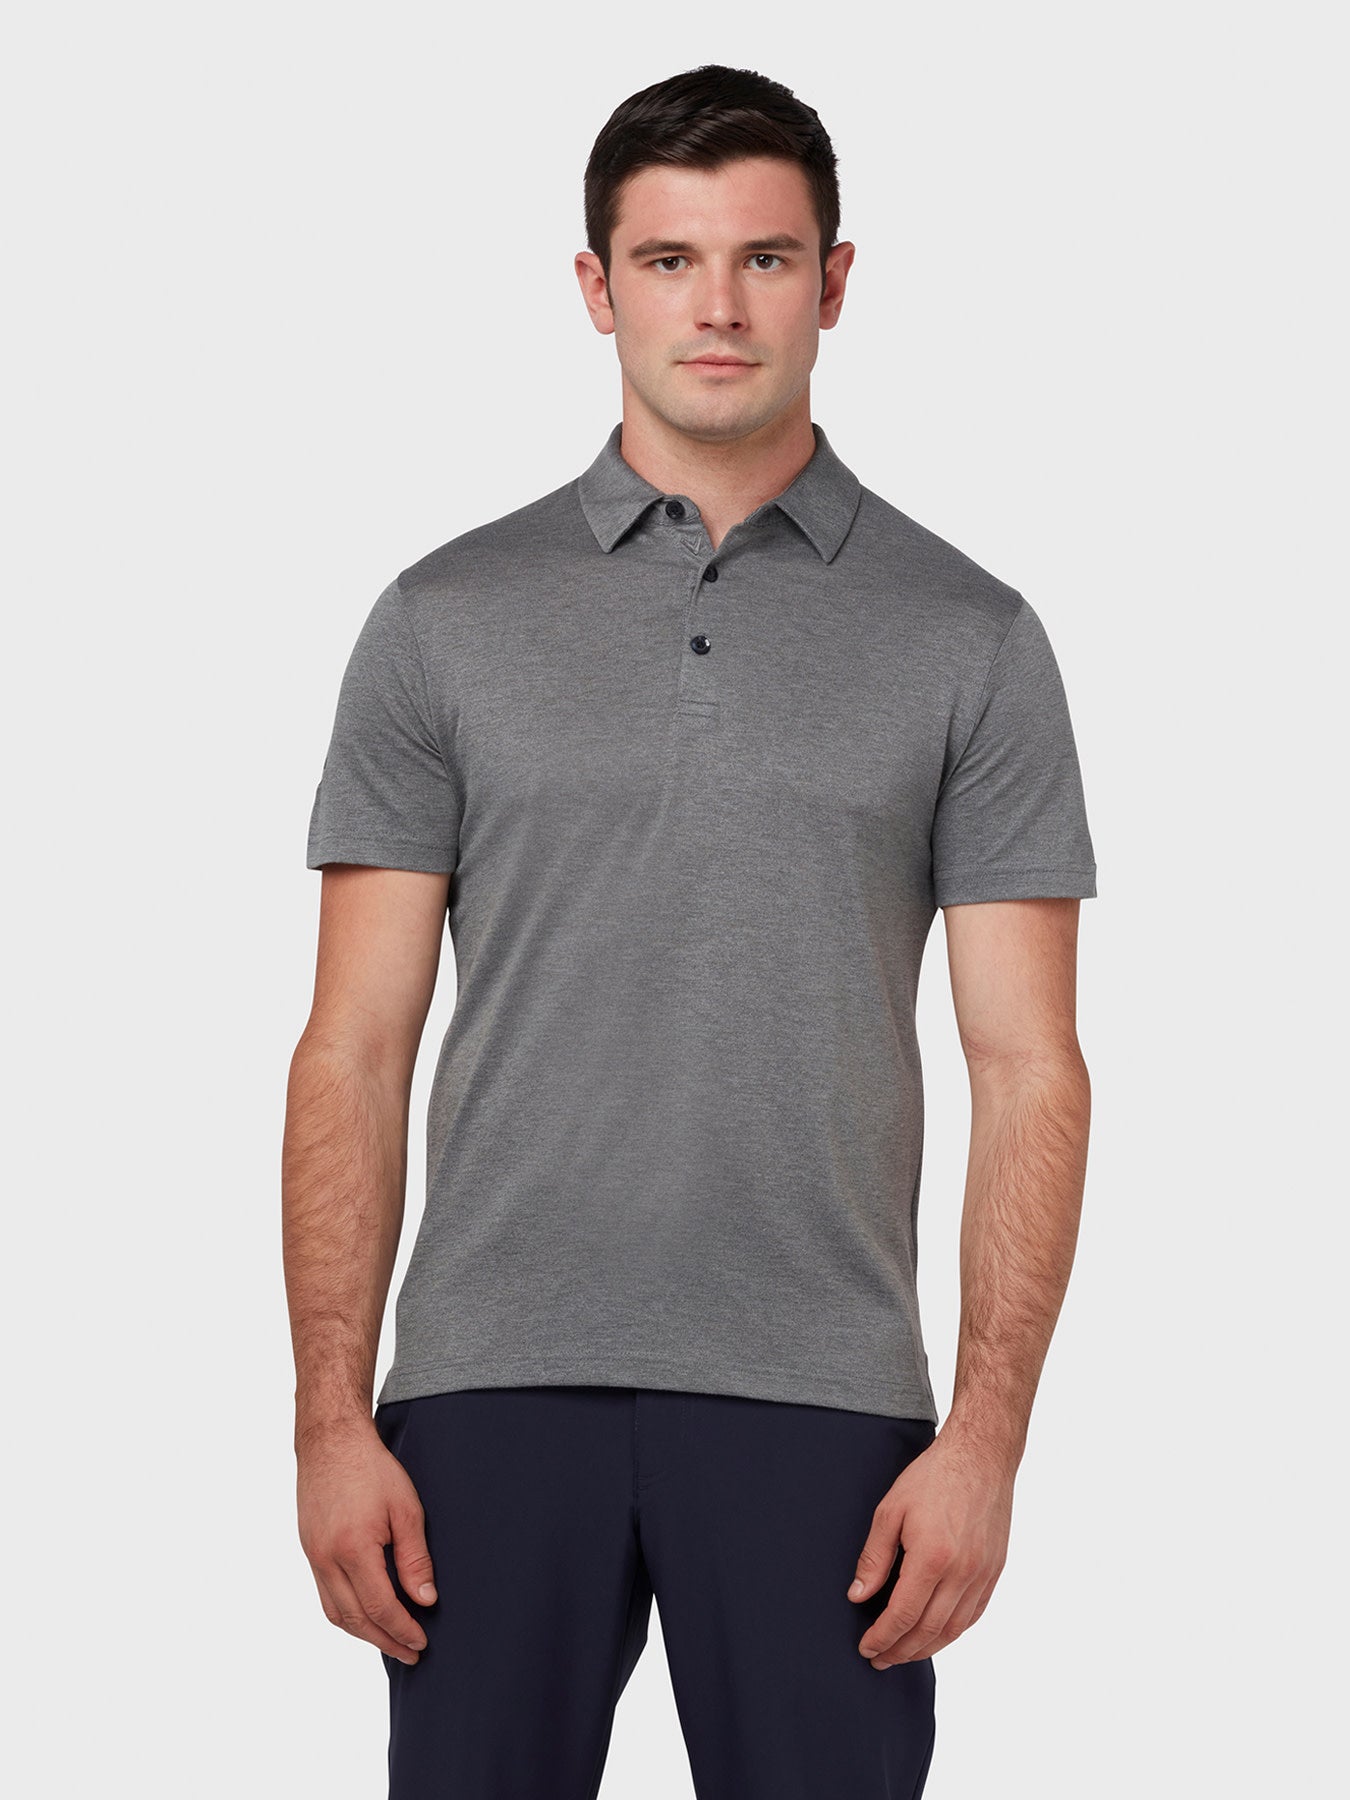 View Soft Touch Solid Polo In Black Heather Black Heather XL information